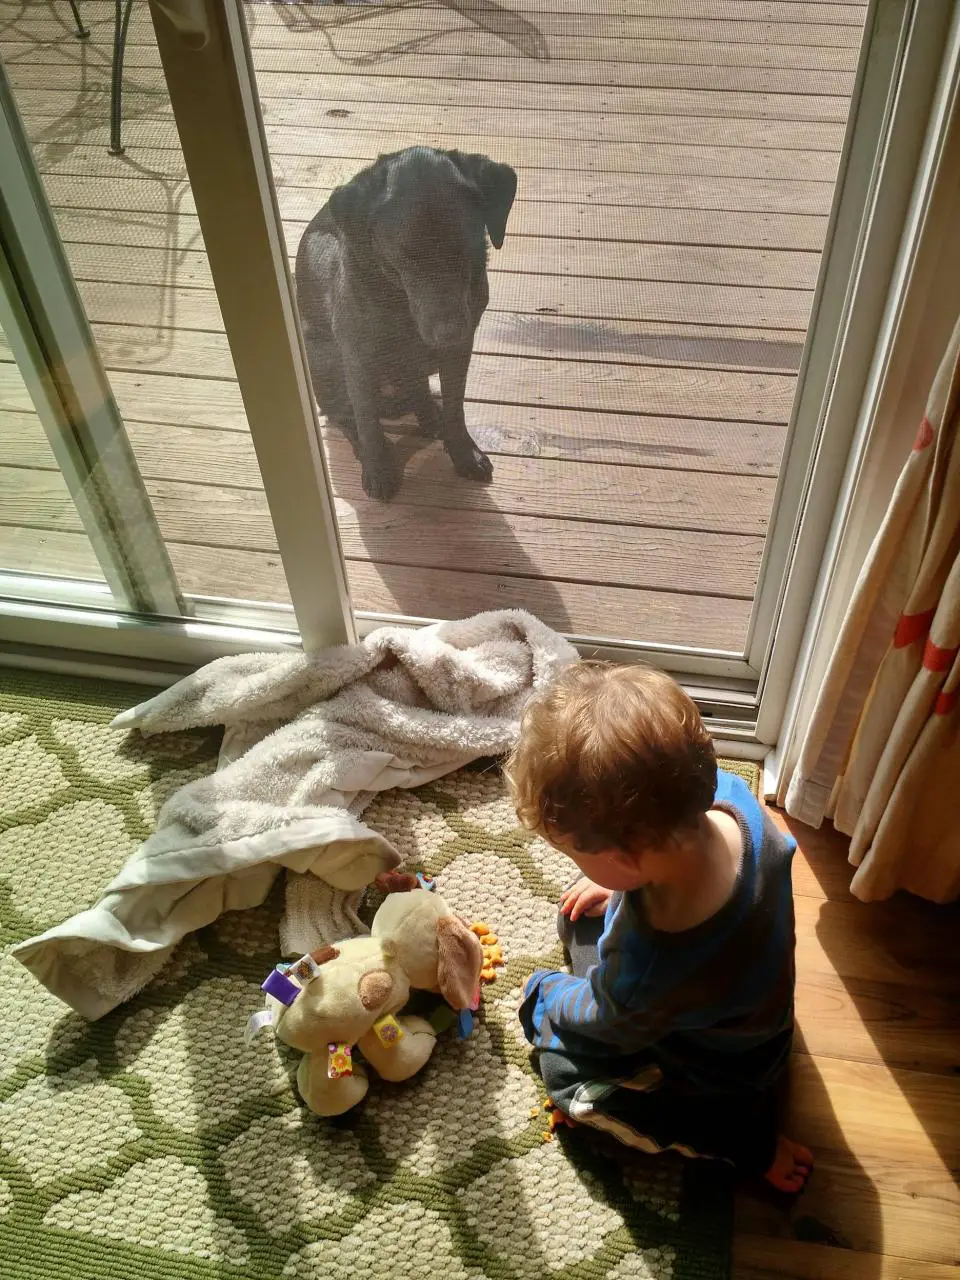 My son feeding his fake dog goldfish while his real dog sits outside, pissed.